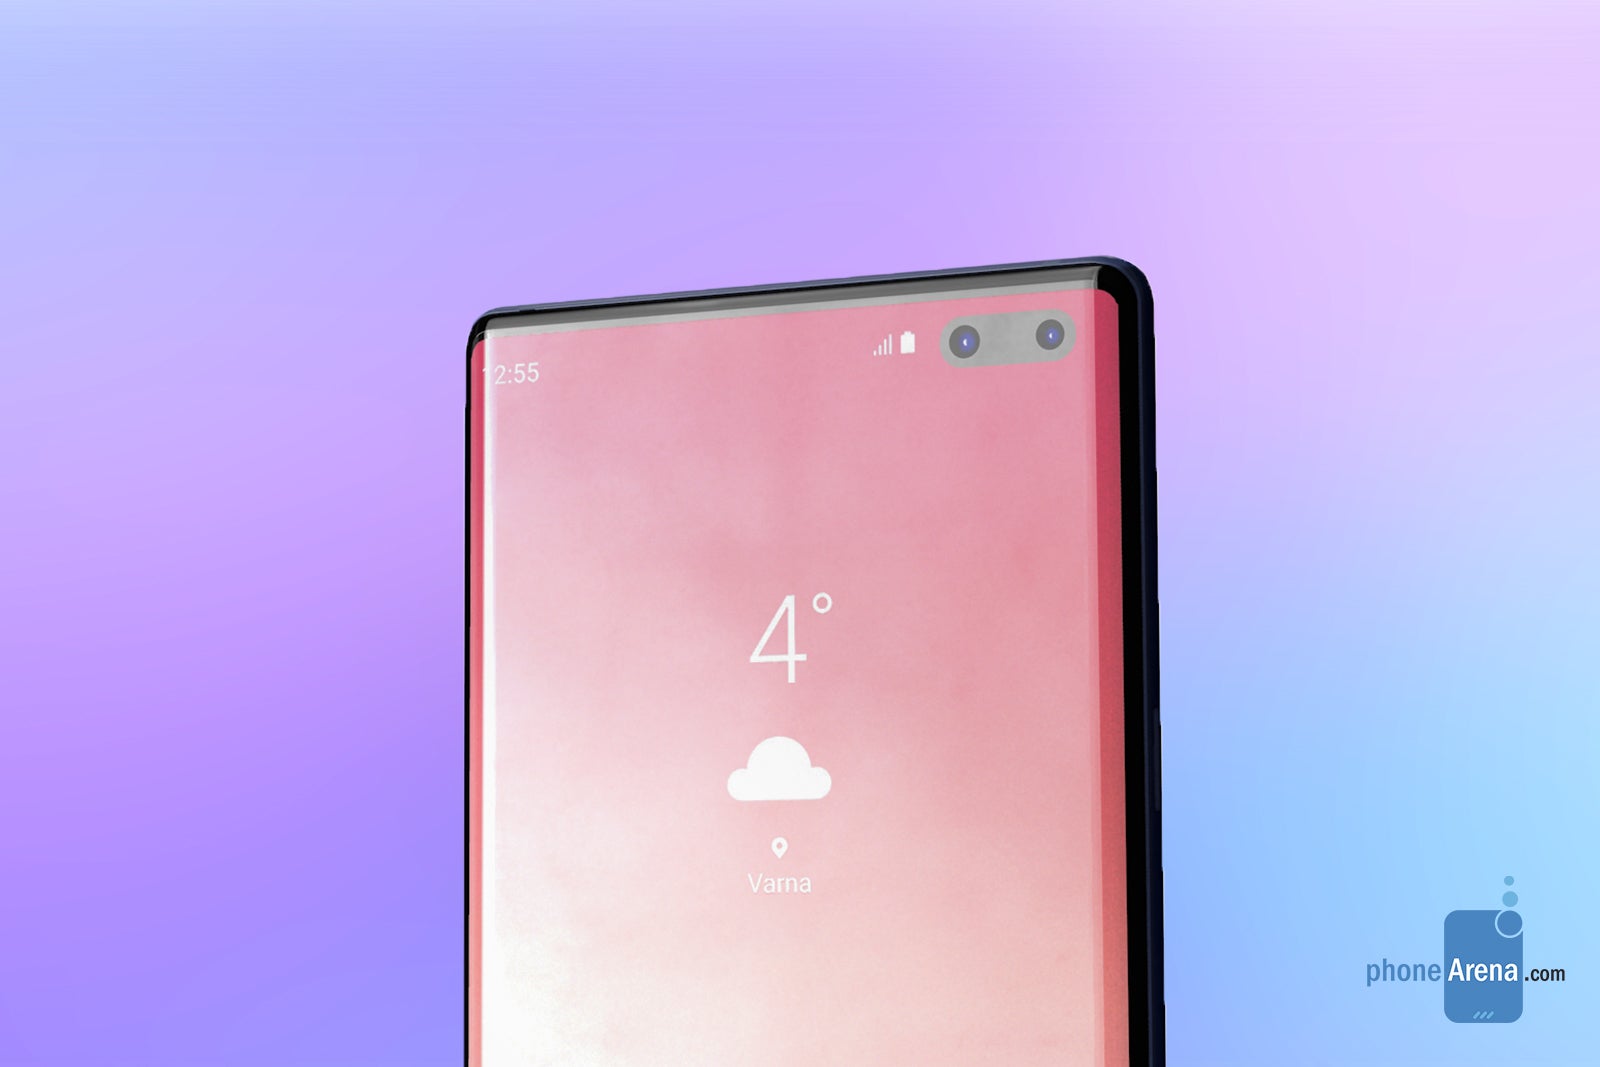 Samsung Galaxy Note 10 concept render - The Galaxy Note 10 could be sold in these six colors